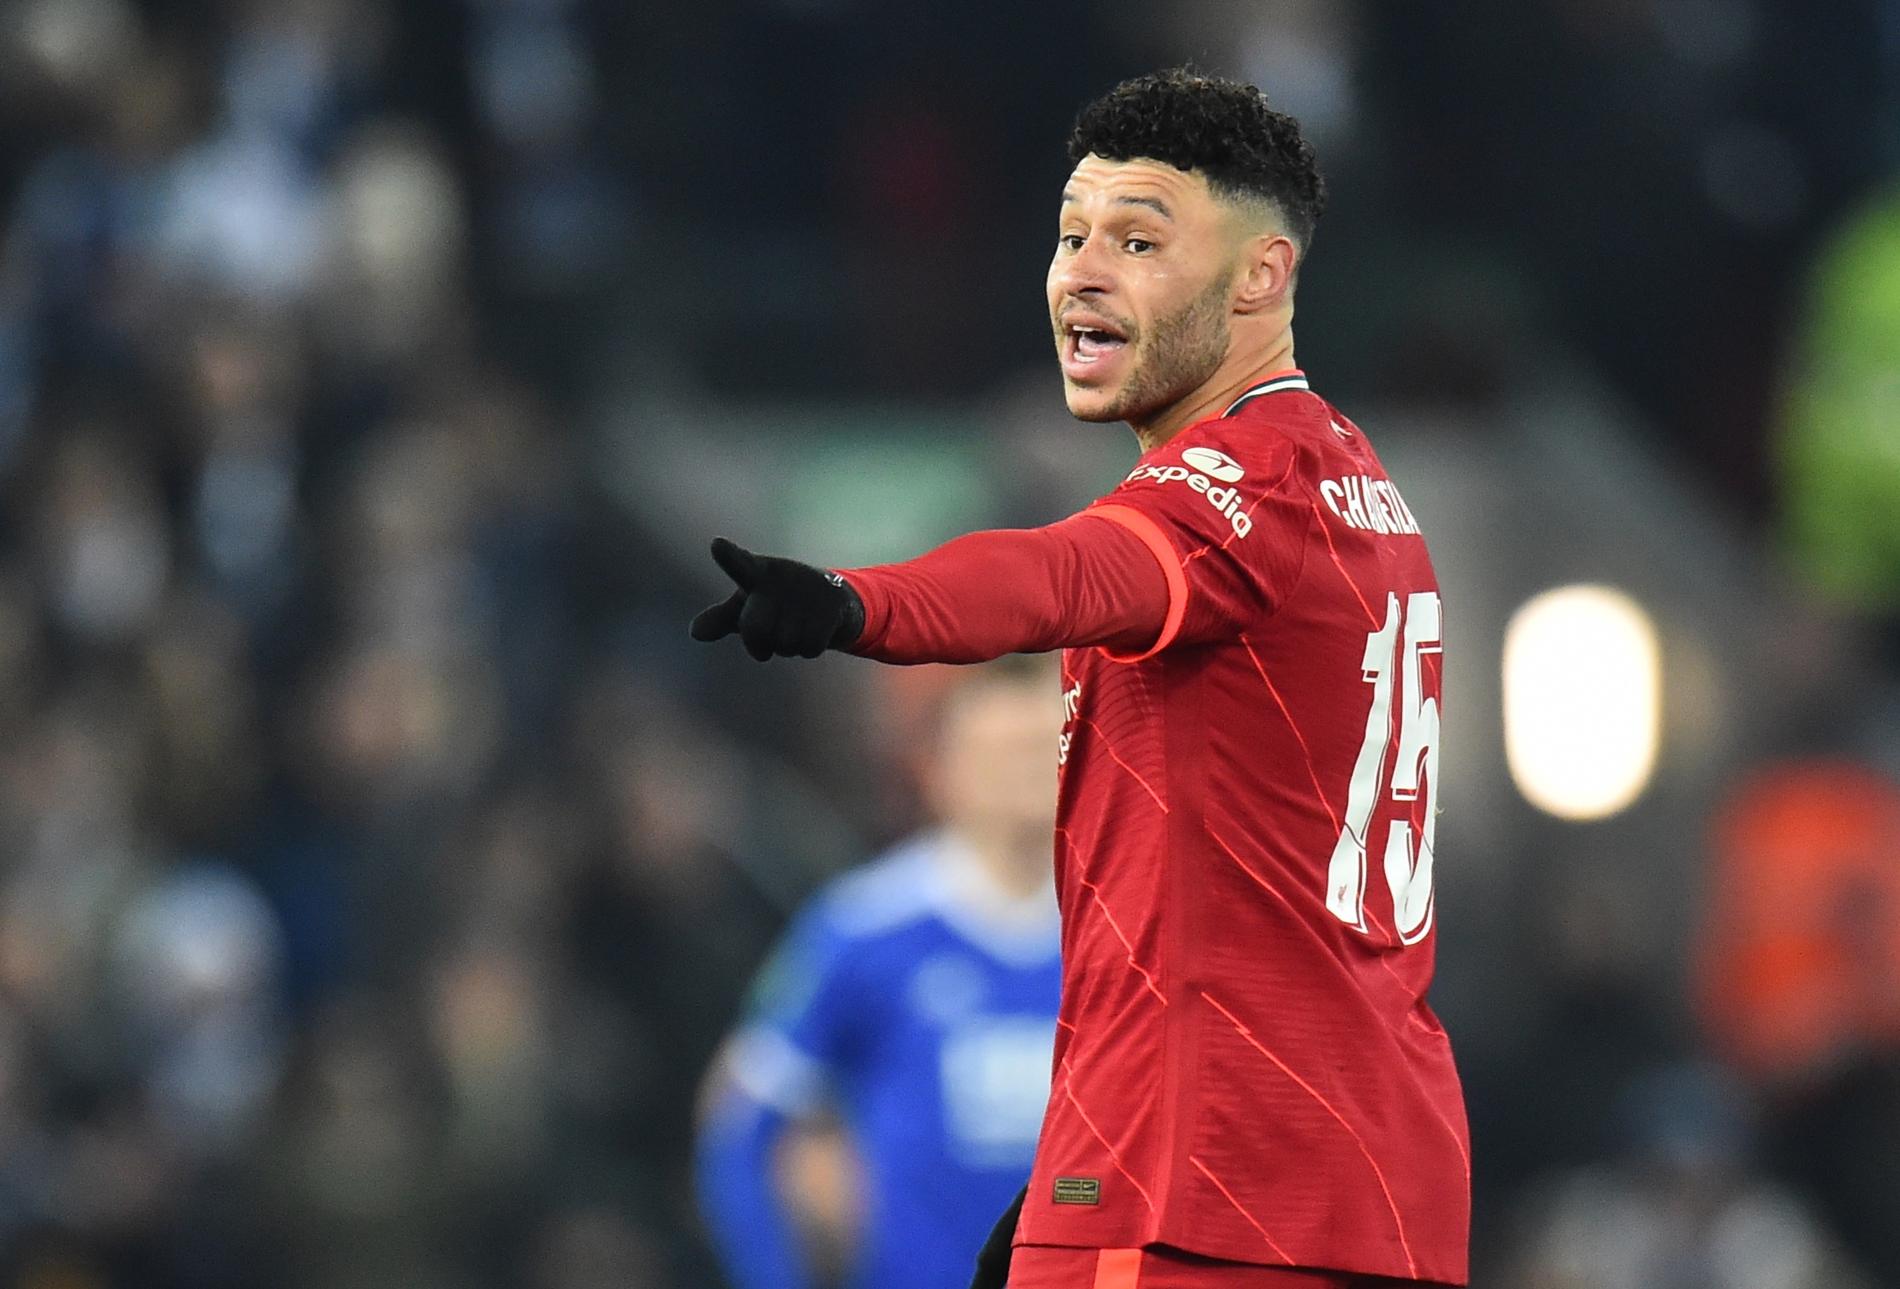 Silly season: The Times: Alex Oxlade-Chamberlain agrees with Besiktas